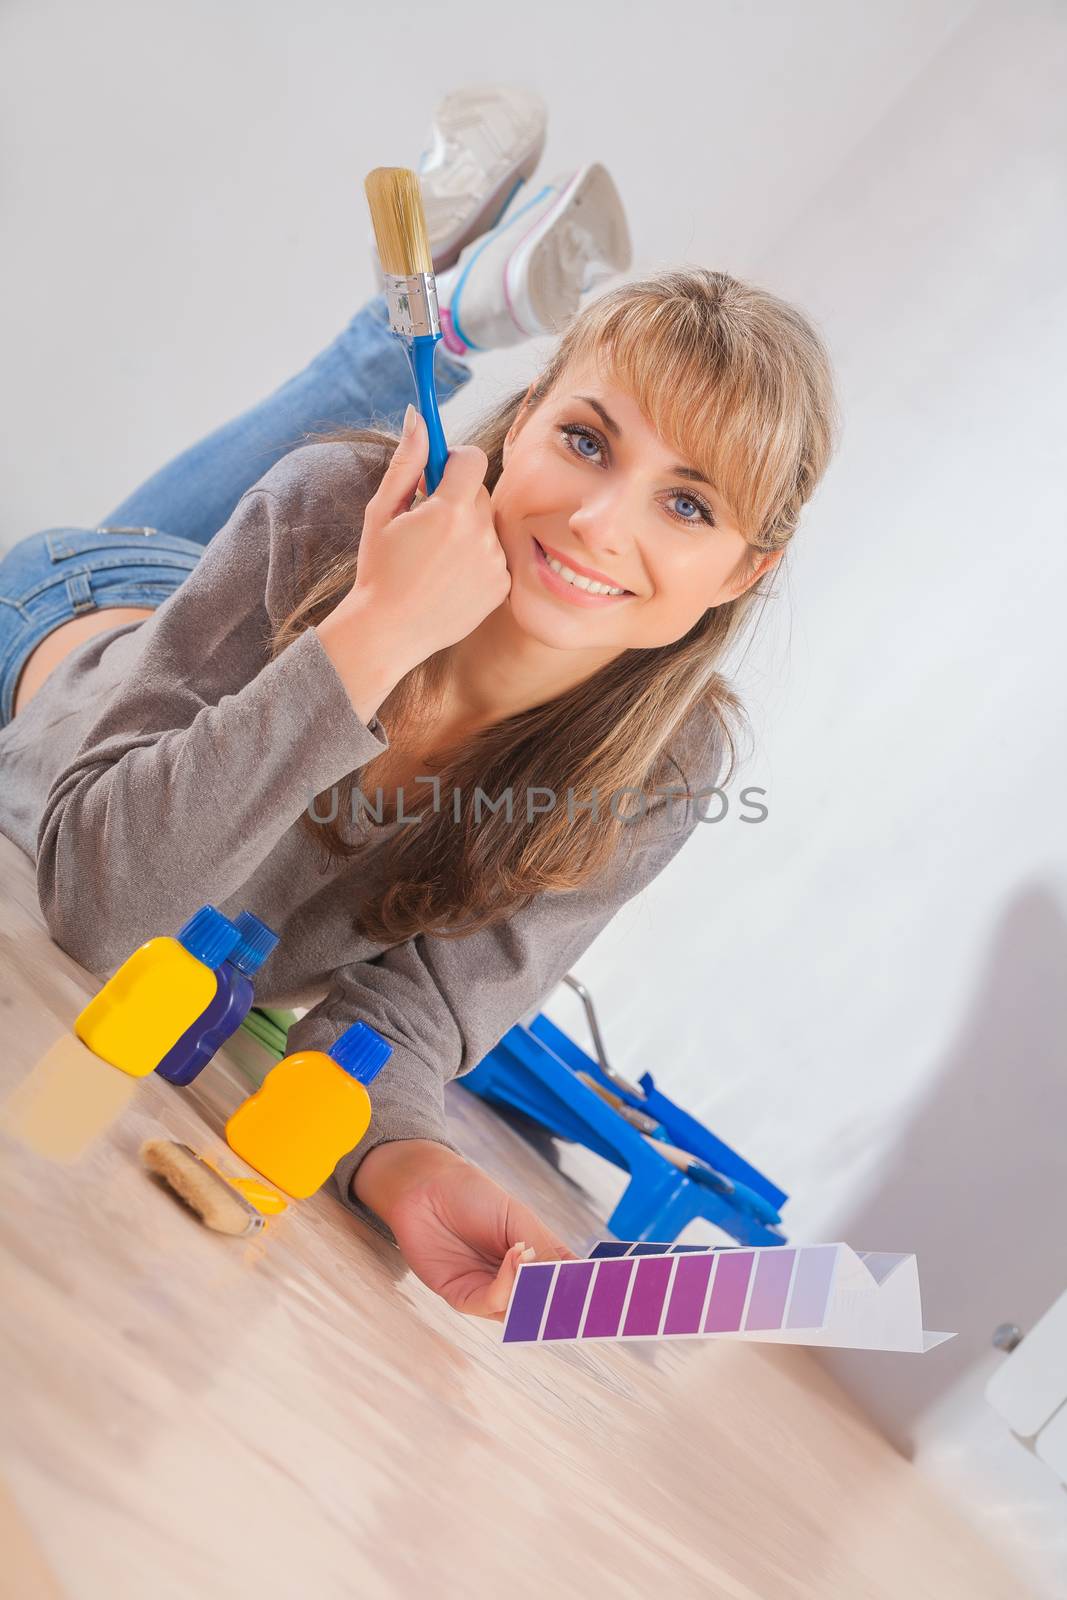 beautiful smiling woman lies on wooden floor holding paintbrush and color palette